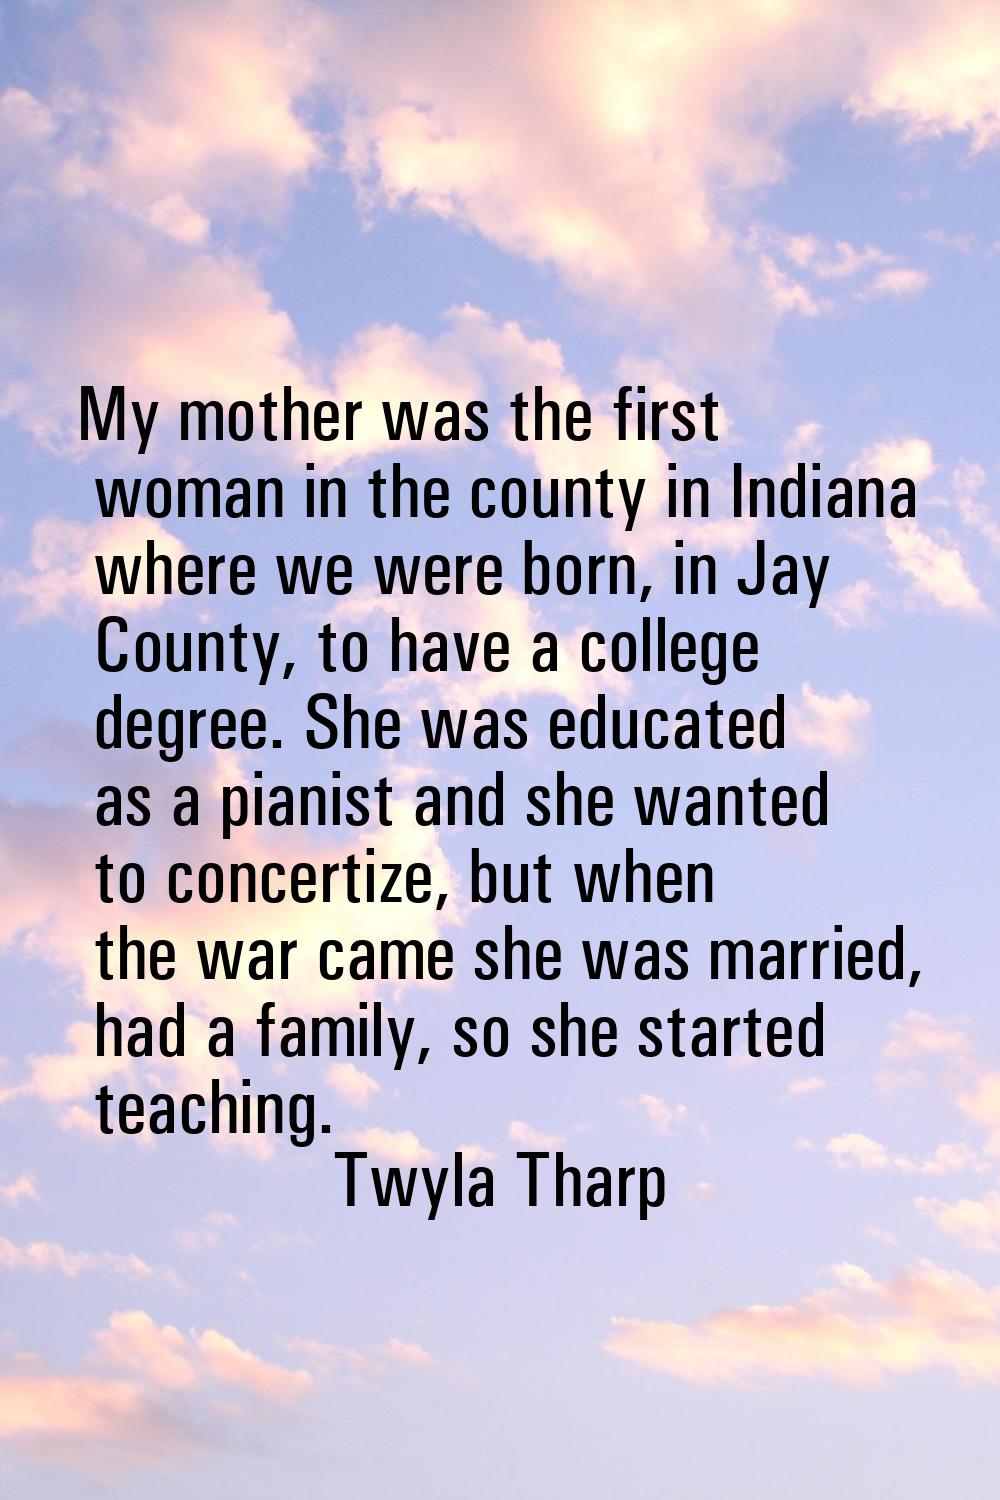 My mother was the first woman in the county in Indiana where we were born, in Jay County, to have a